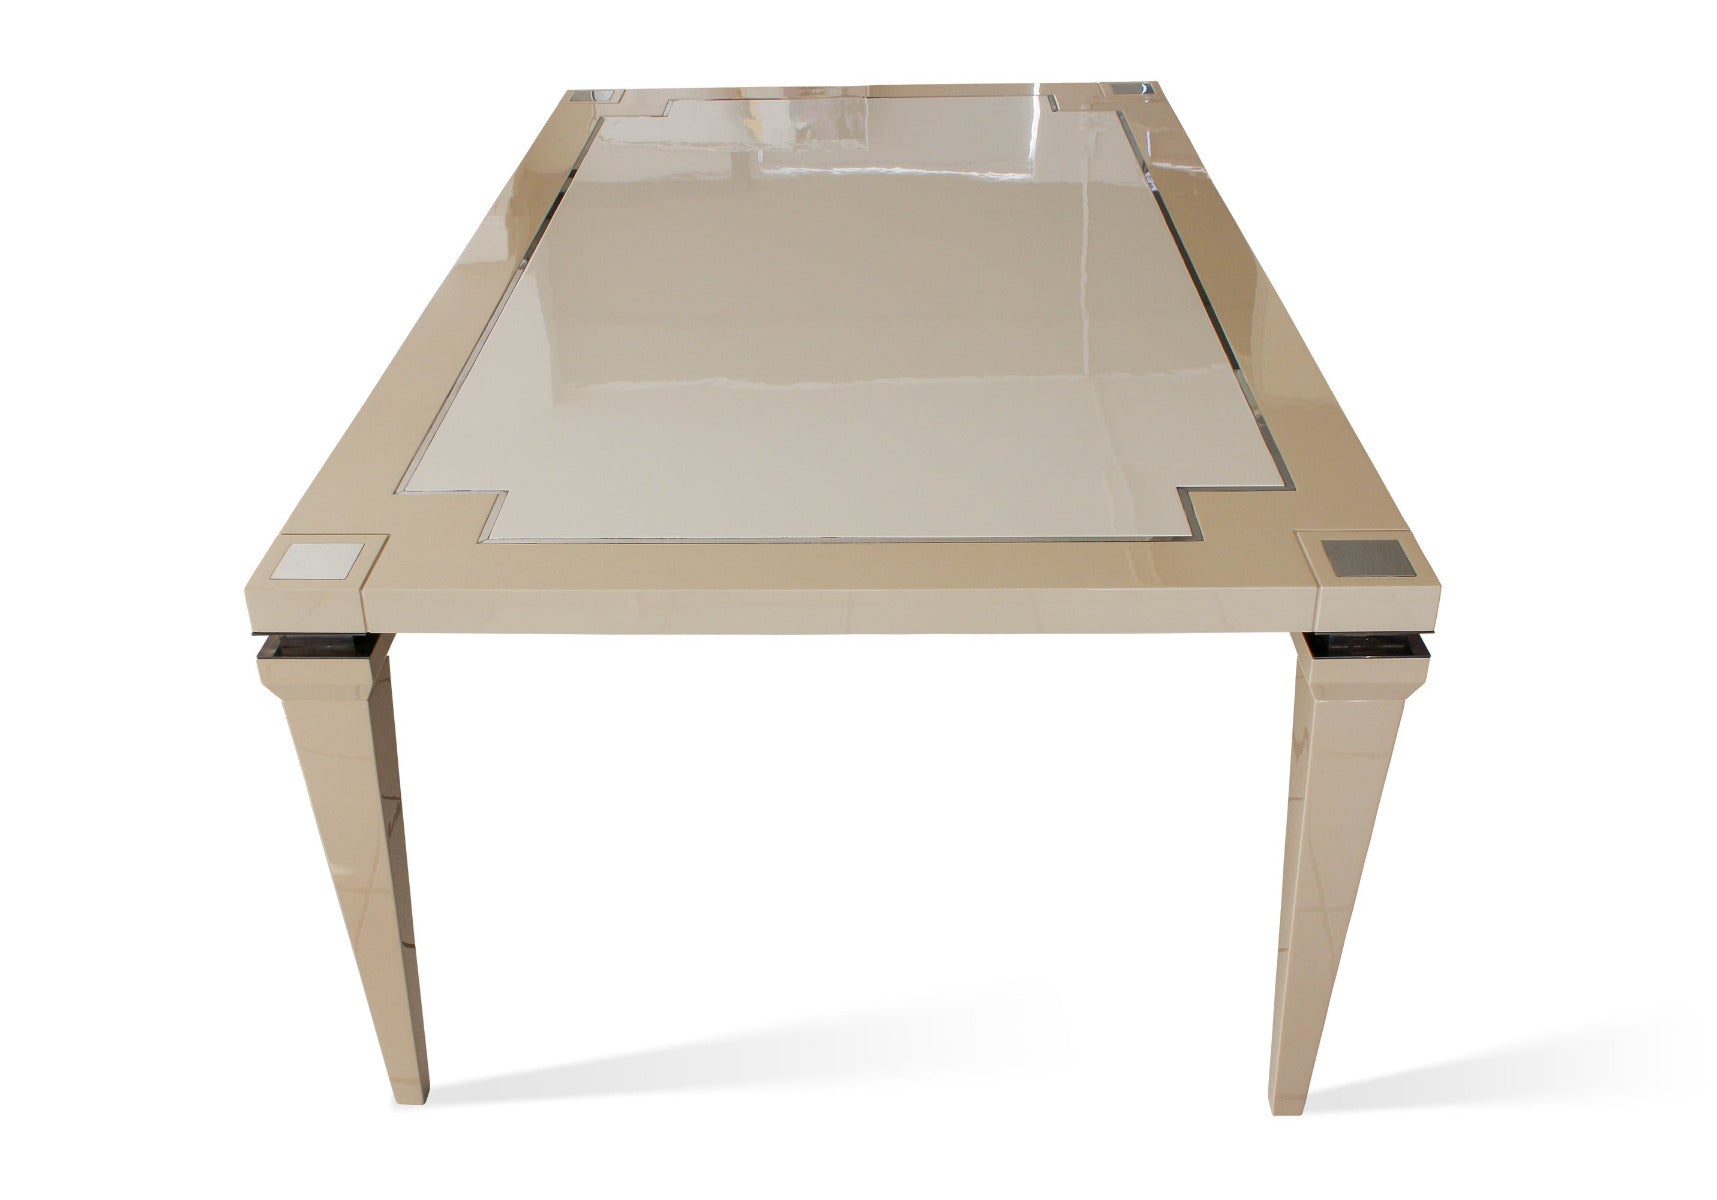 Luxury dining table in gloss ivory wood with silver accents.